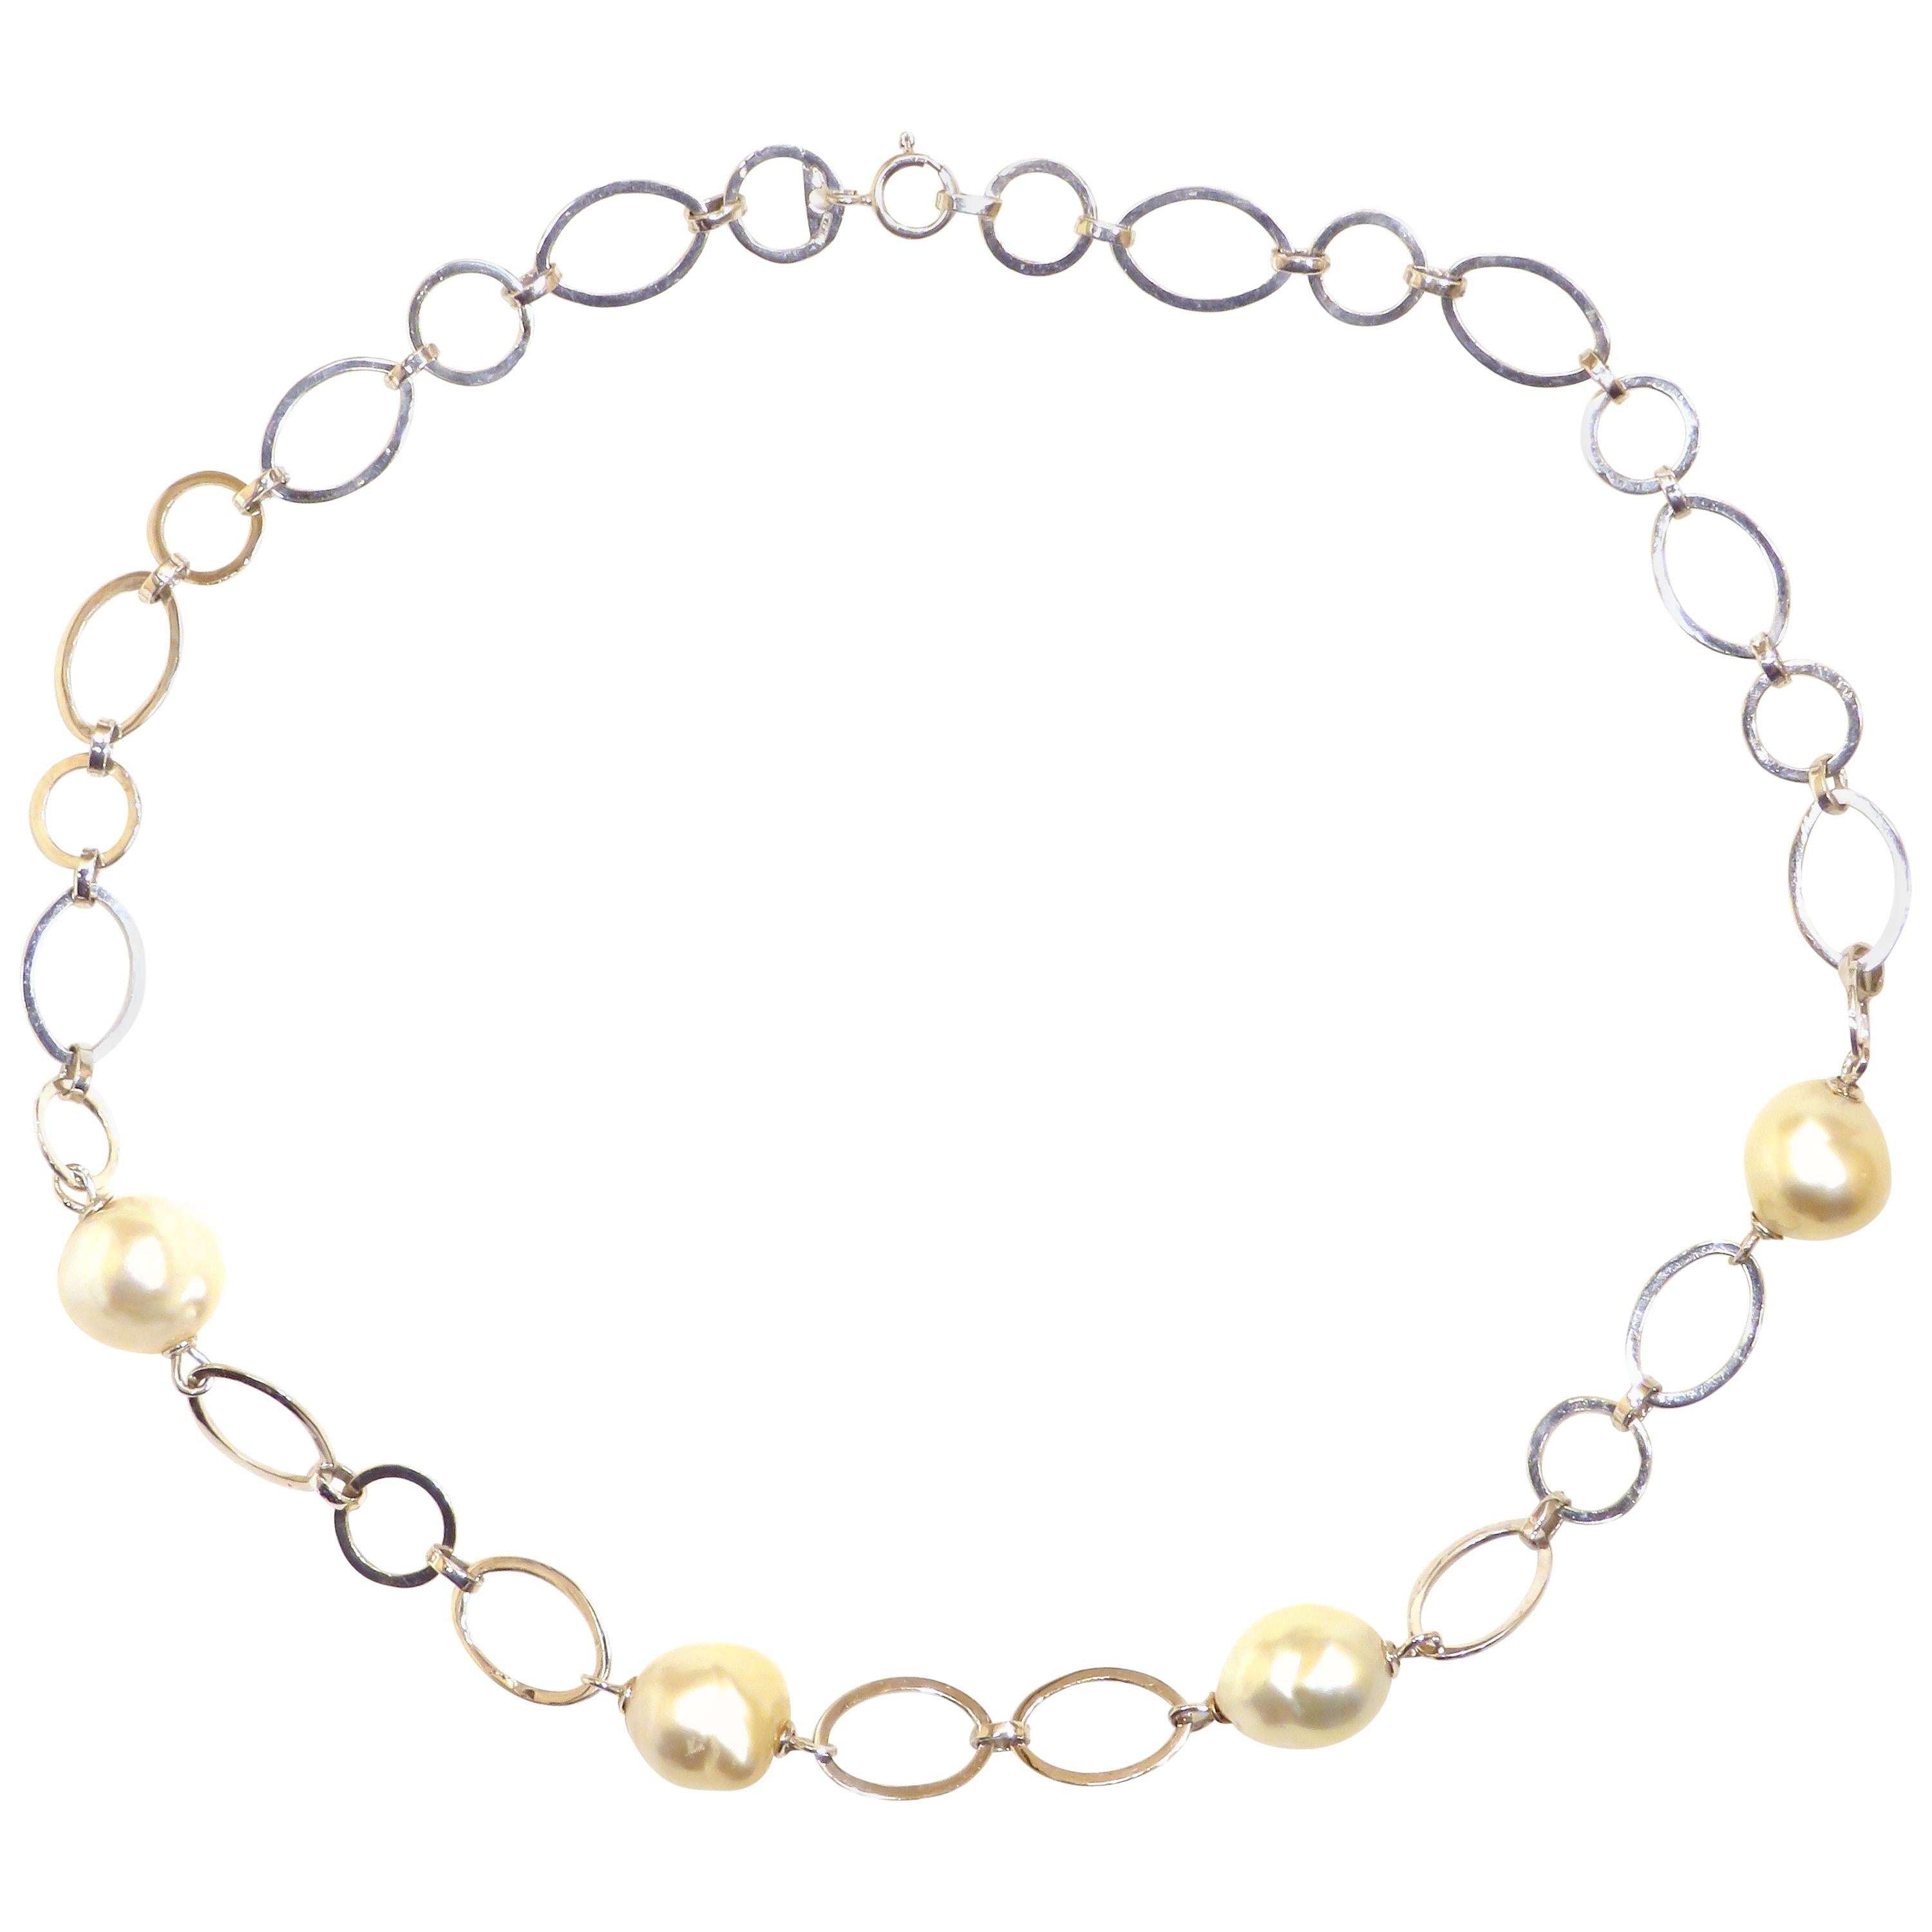 Australian Pearls White Gold Necklace Handcrafted in Italy by Botta Gioielli